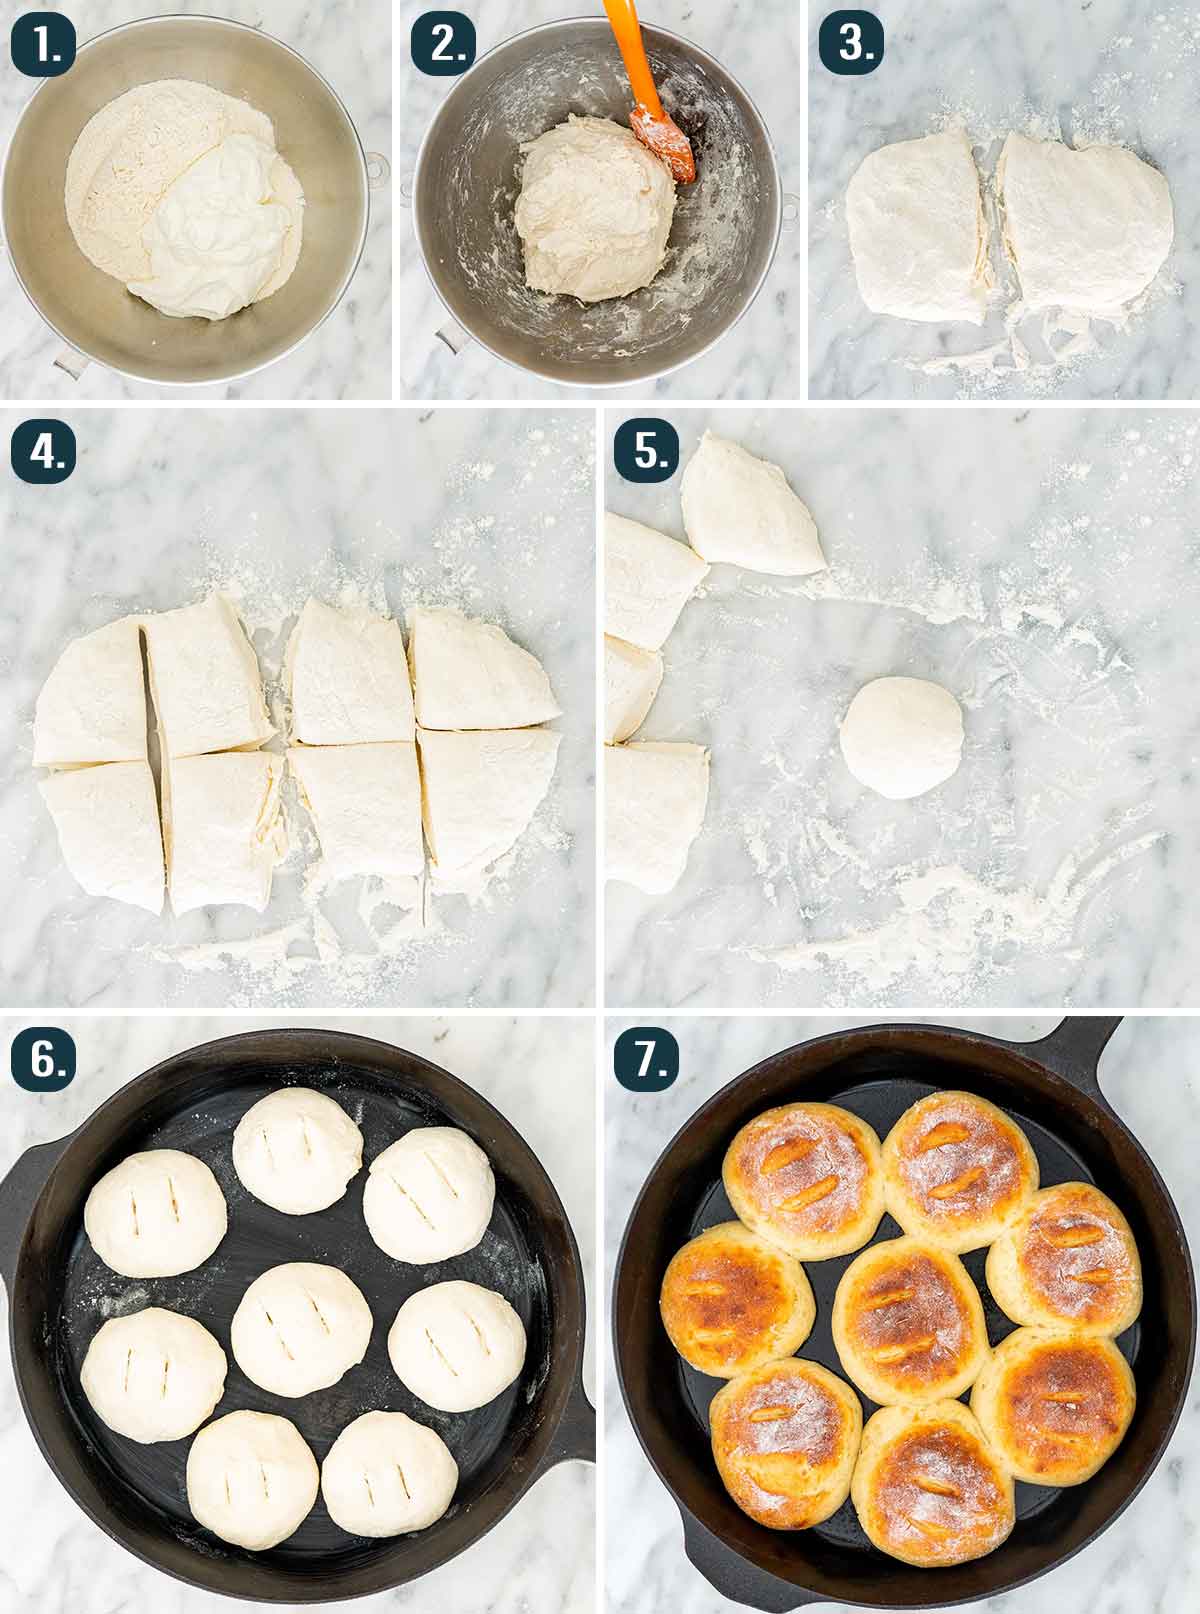 process shots showing how to make 2 ingredient dough and form it into dinner rolls